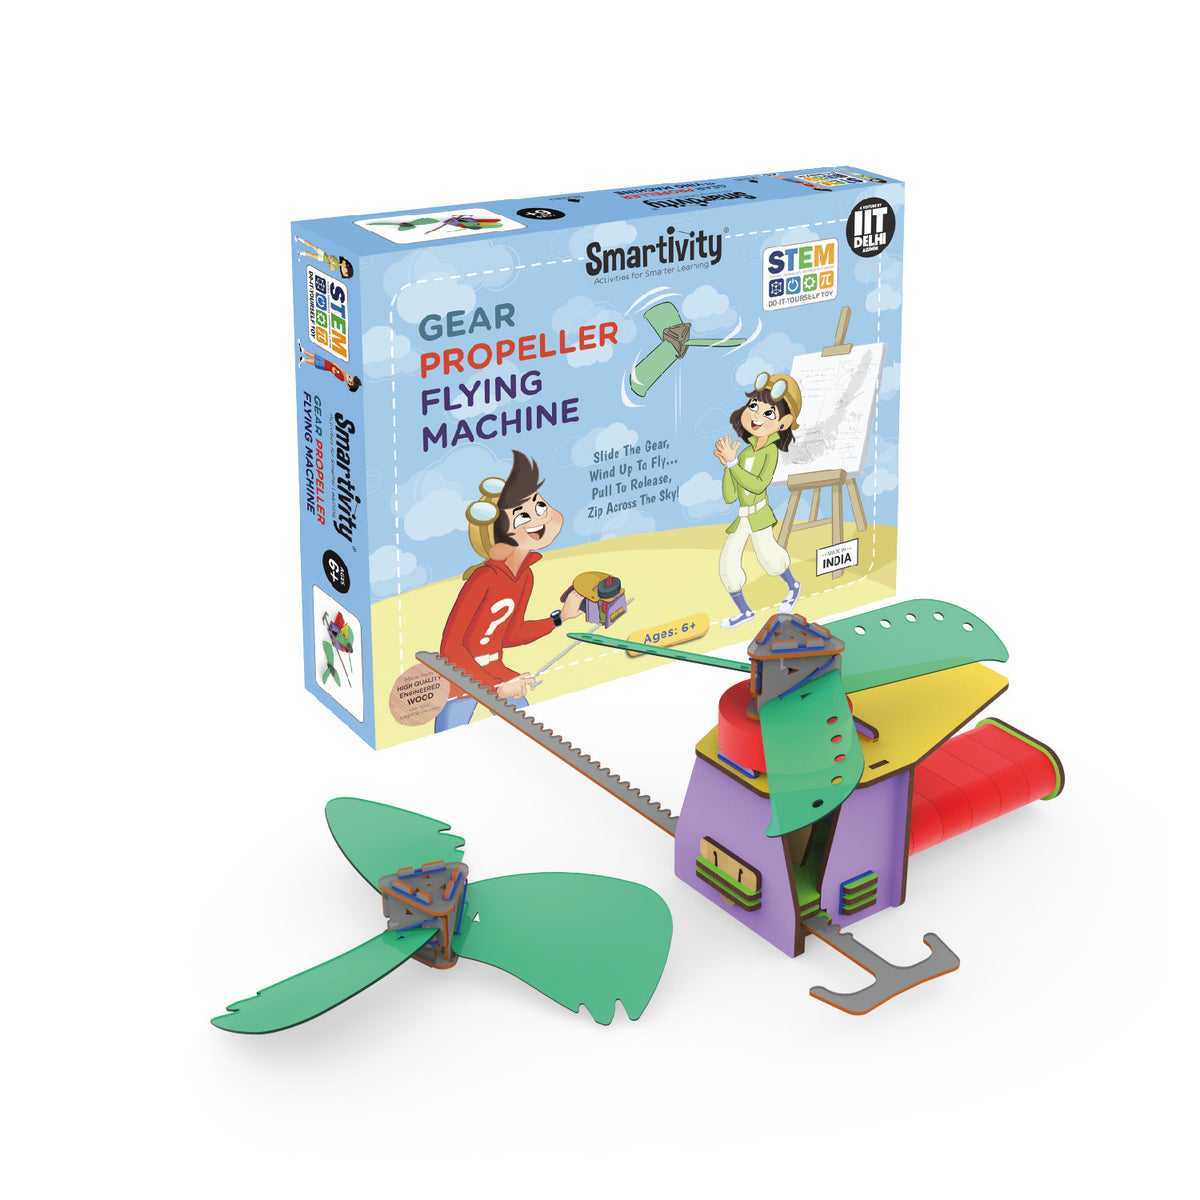 Smartivity - Gear Propeller Flying Machine Toy product image 2